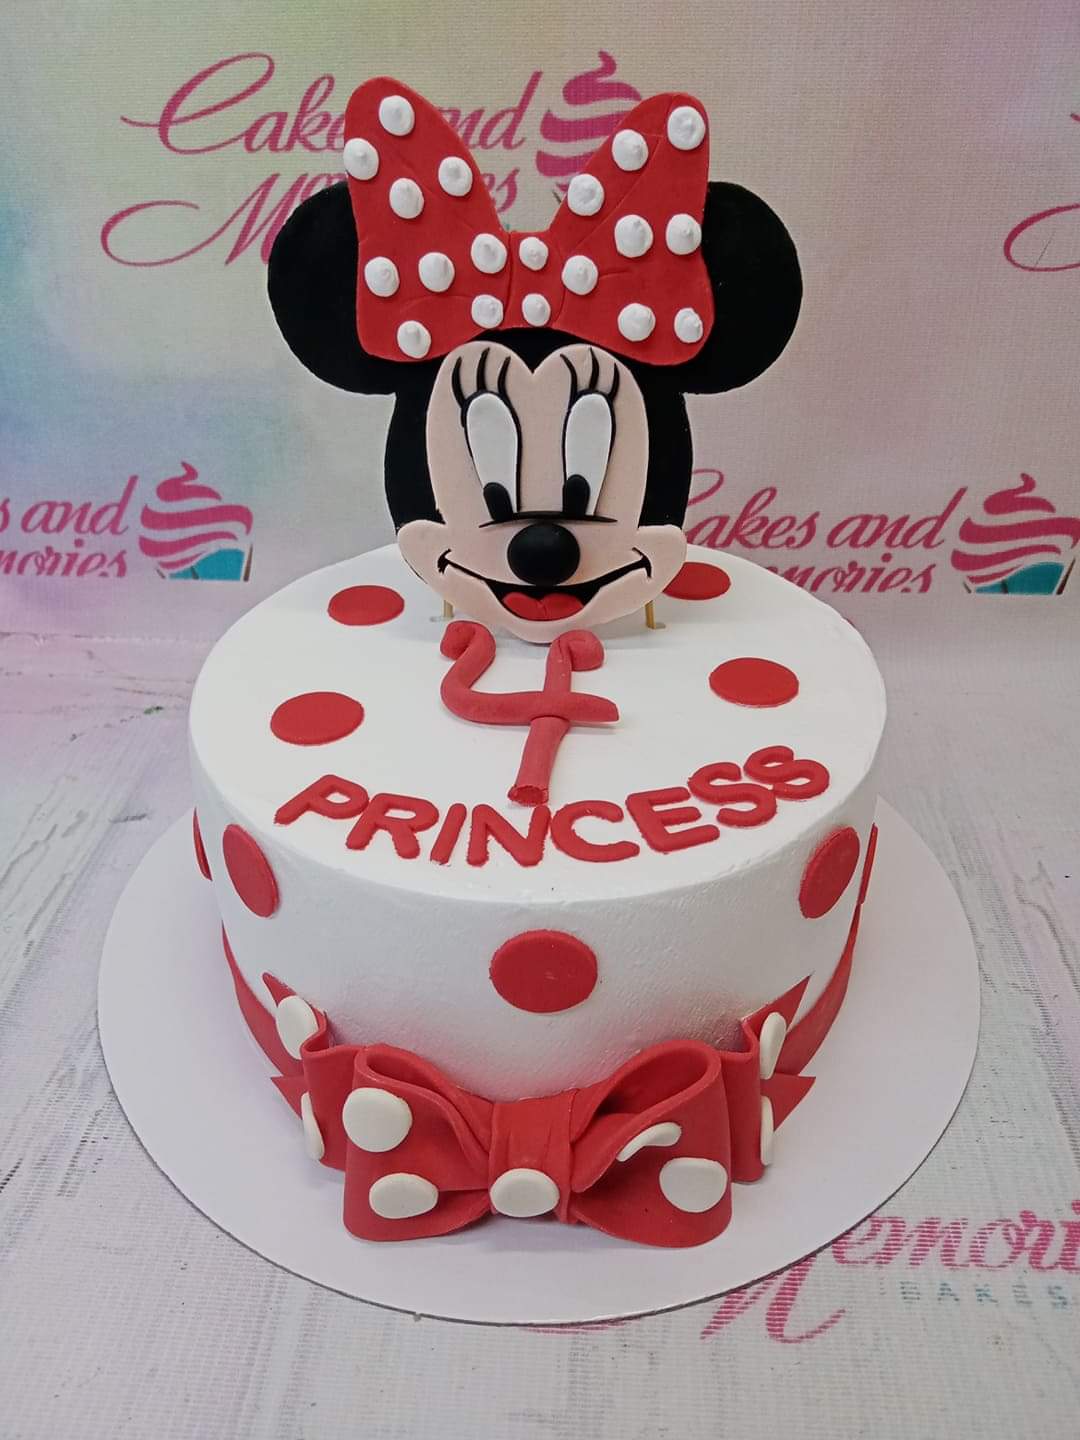 22 Cute Minnie Mouse Cake Designs - The Wonder Cottage | Minnie mouse cake  design, Minnie mouse birthday cakes, Minnie mouse cake